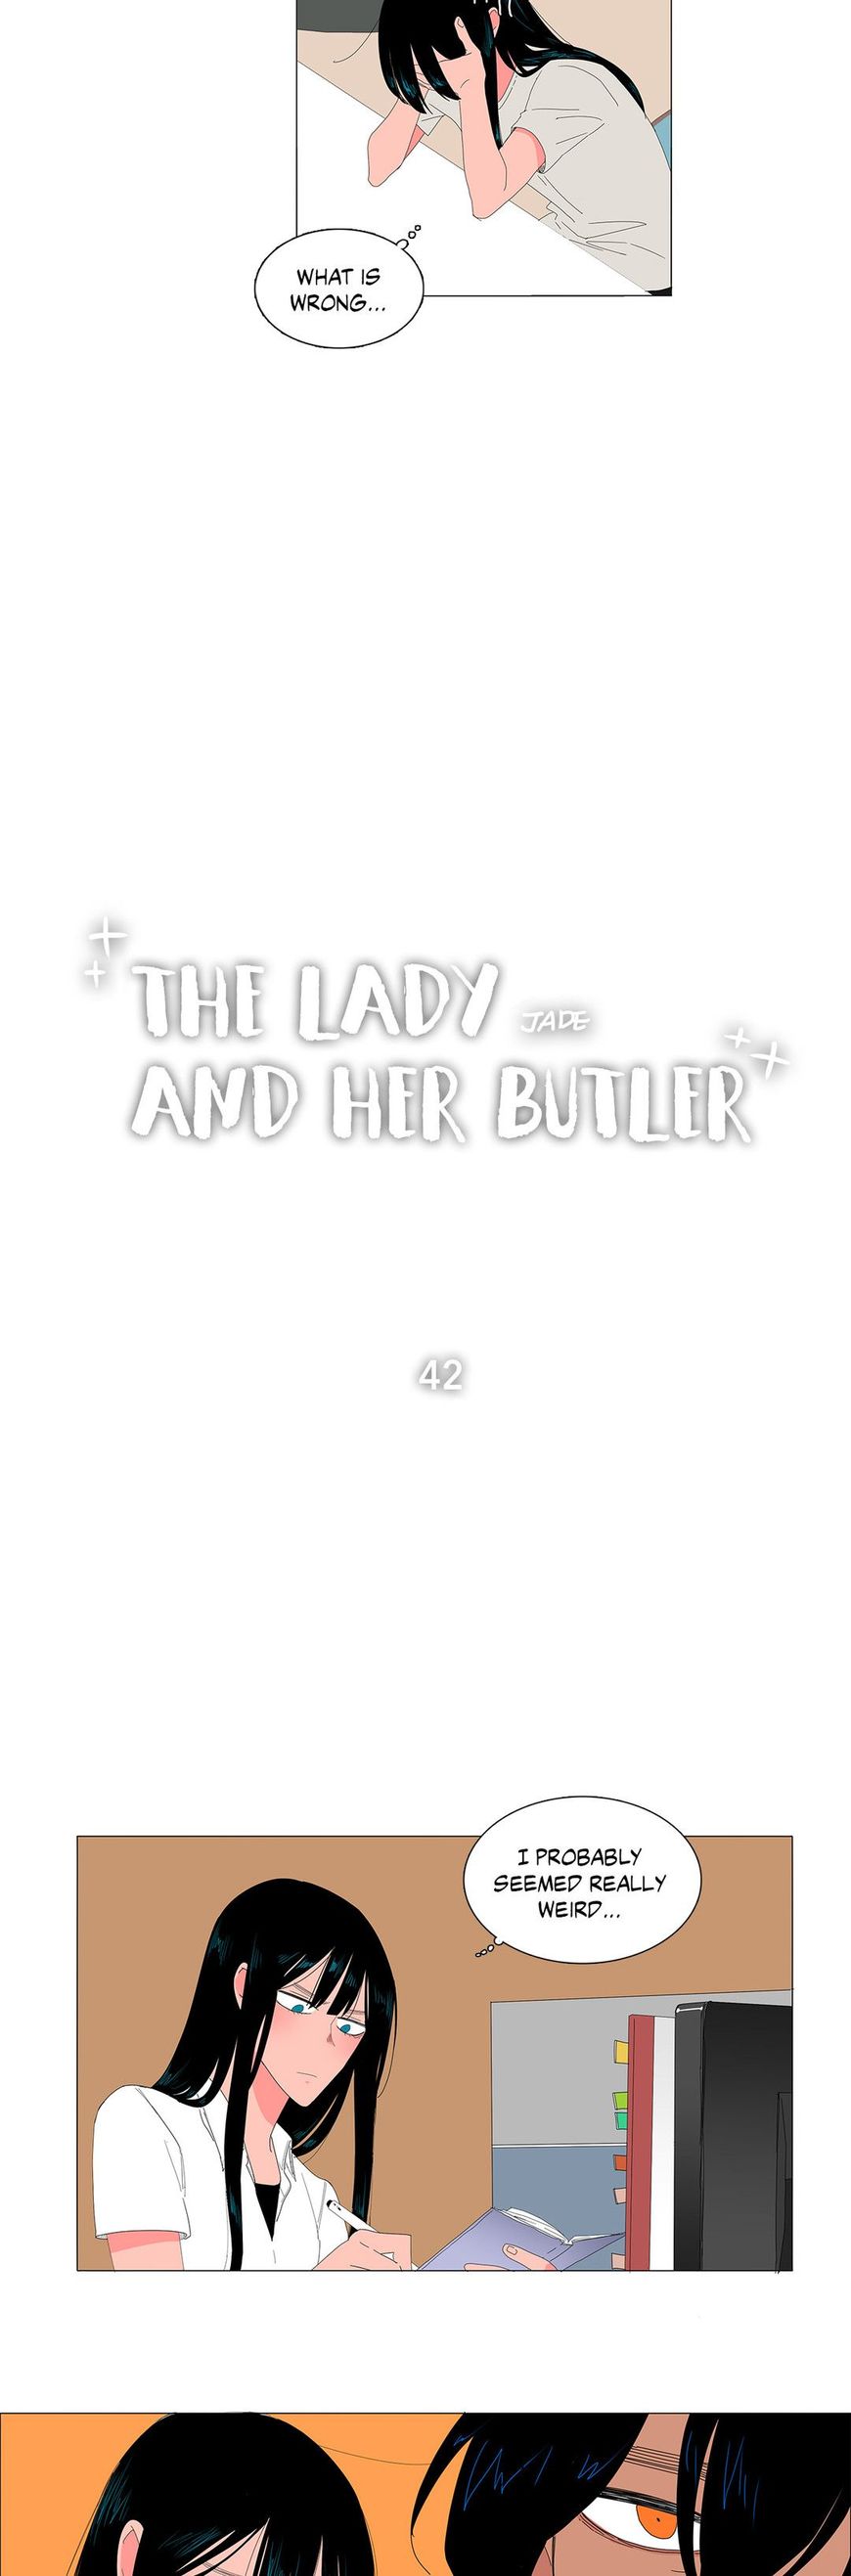 The Lady and Her Butler 42